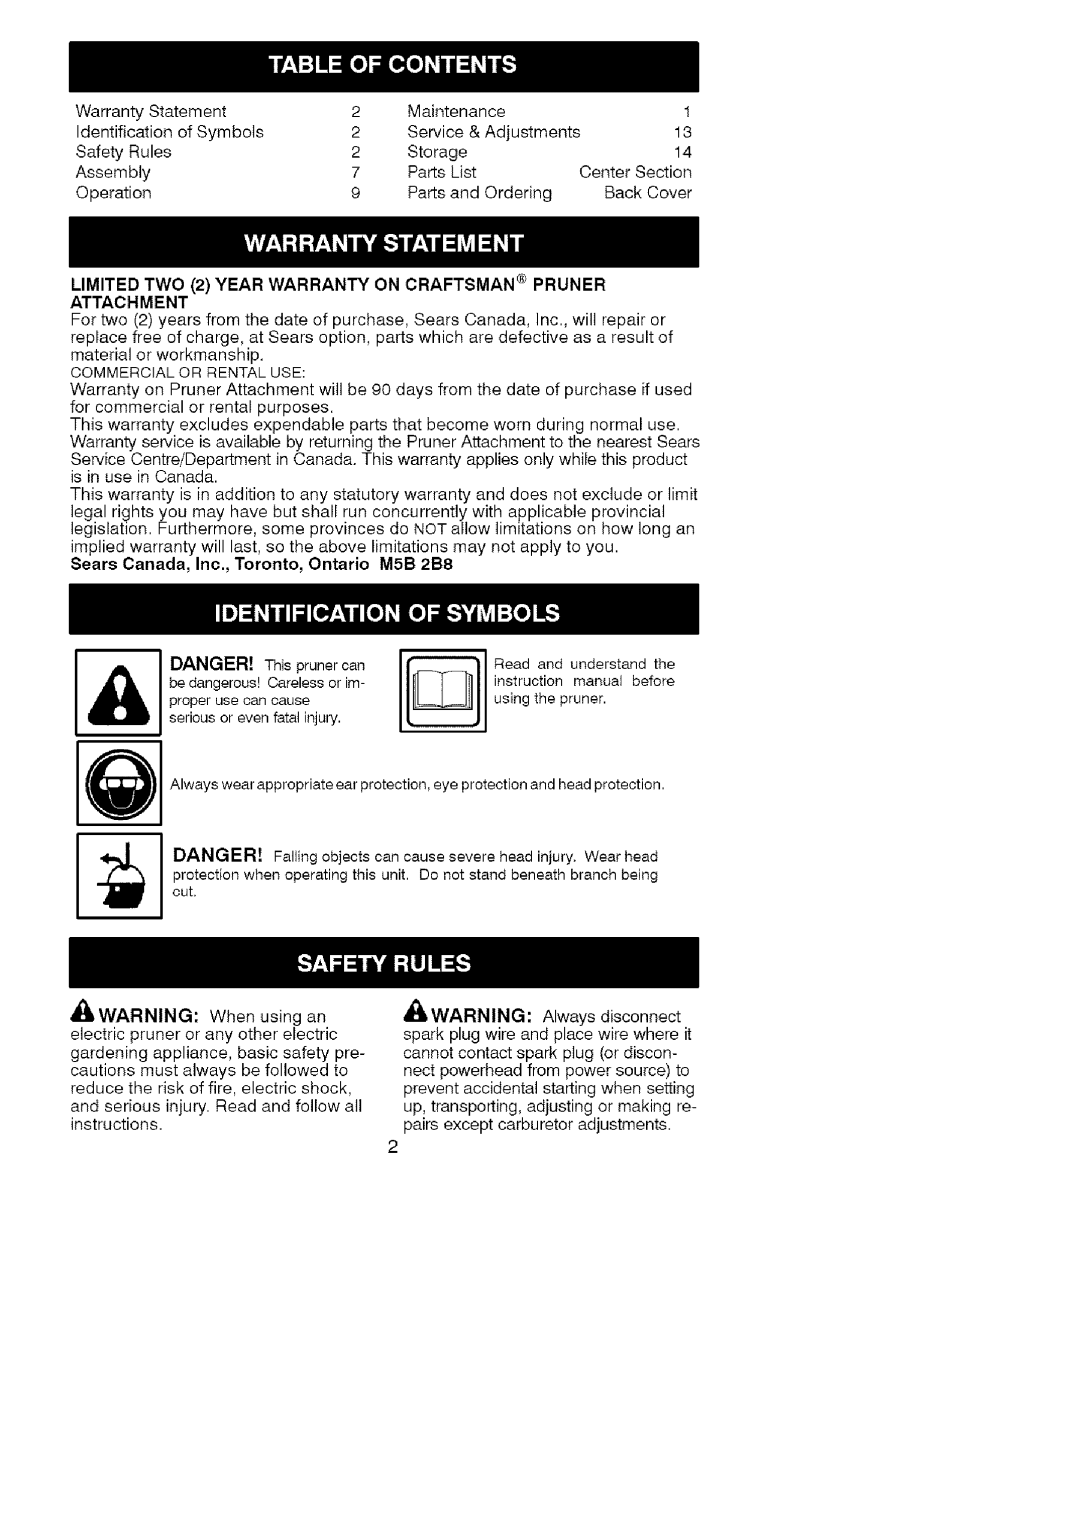 Craftsman C944.514610 instruction manual LIMITED TWO 2 YEAR WARRANTY ON CRAFTSMAN PRUNER, Attachment 